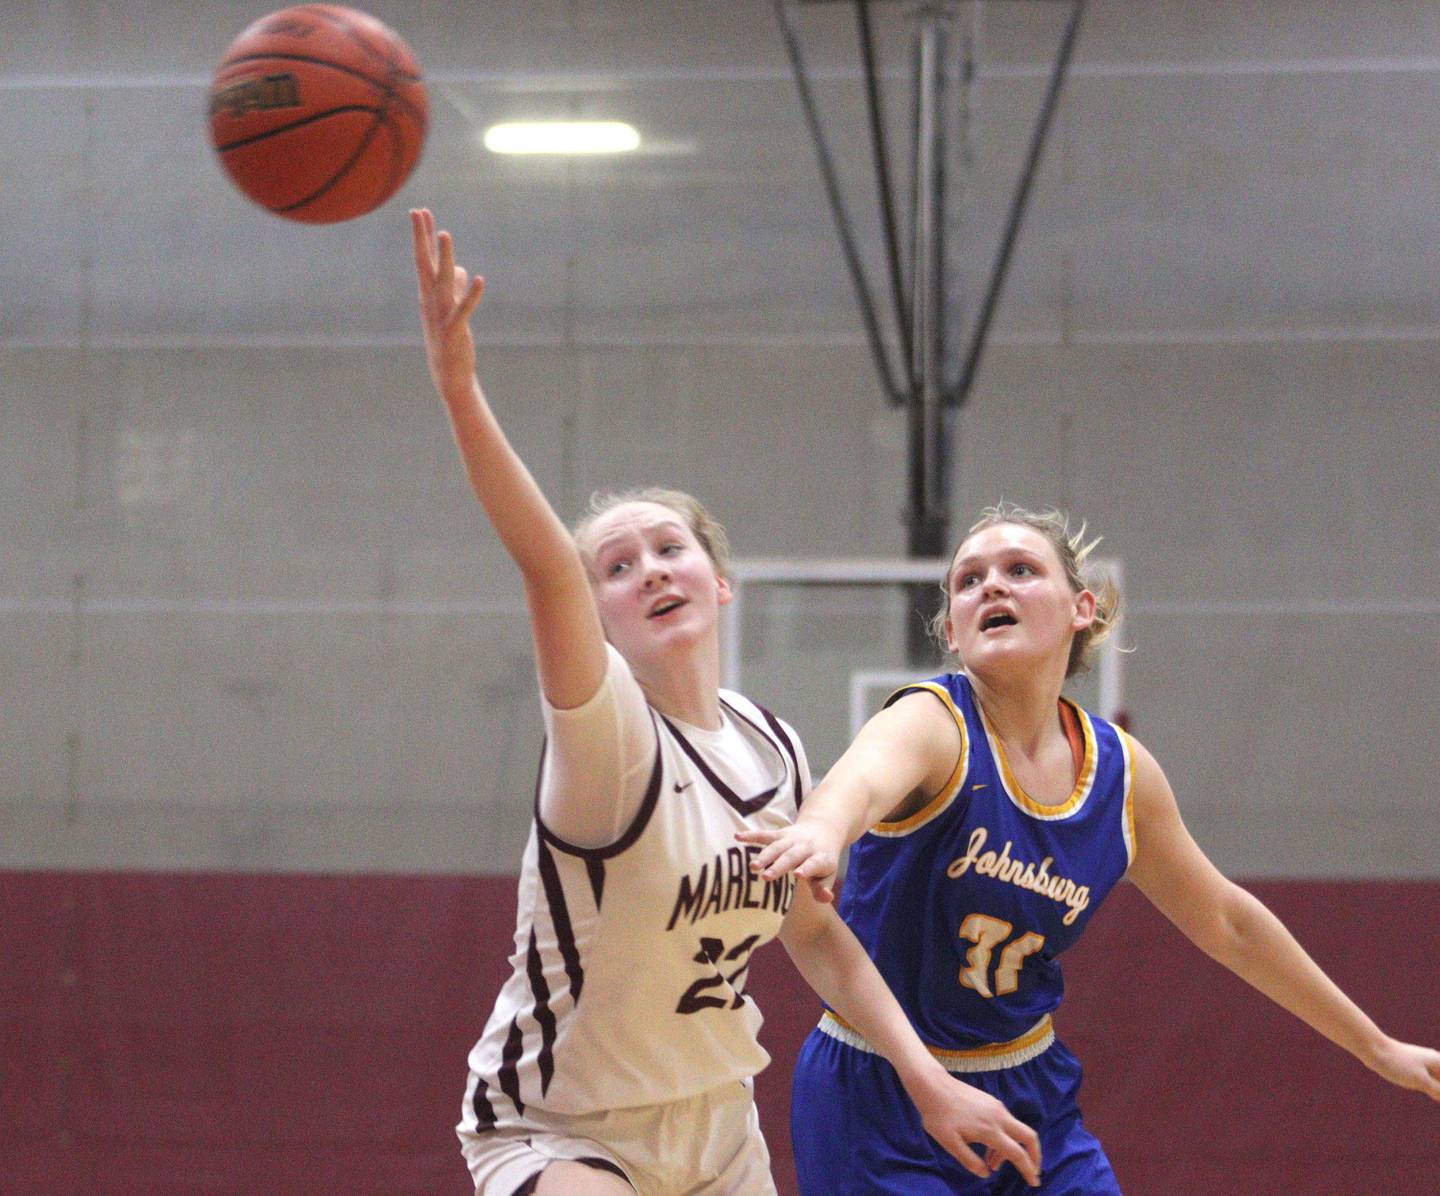 Marengo’s Dayna Carr, left, and Johnsburg’s Sophie Person look for the ball in varsity girls basketball at Marengo Tuesday night.